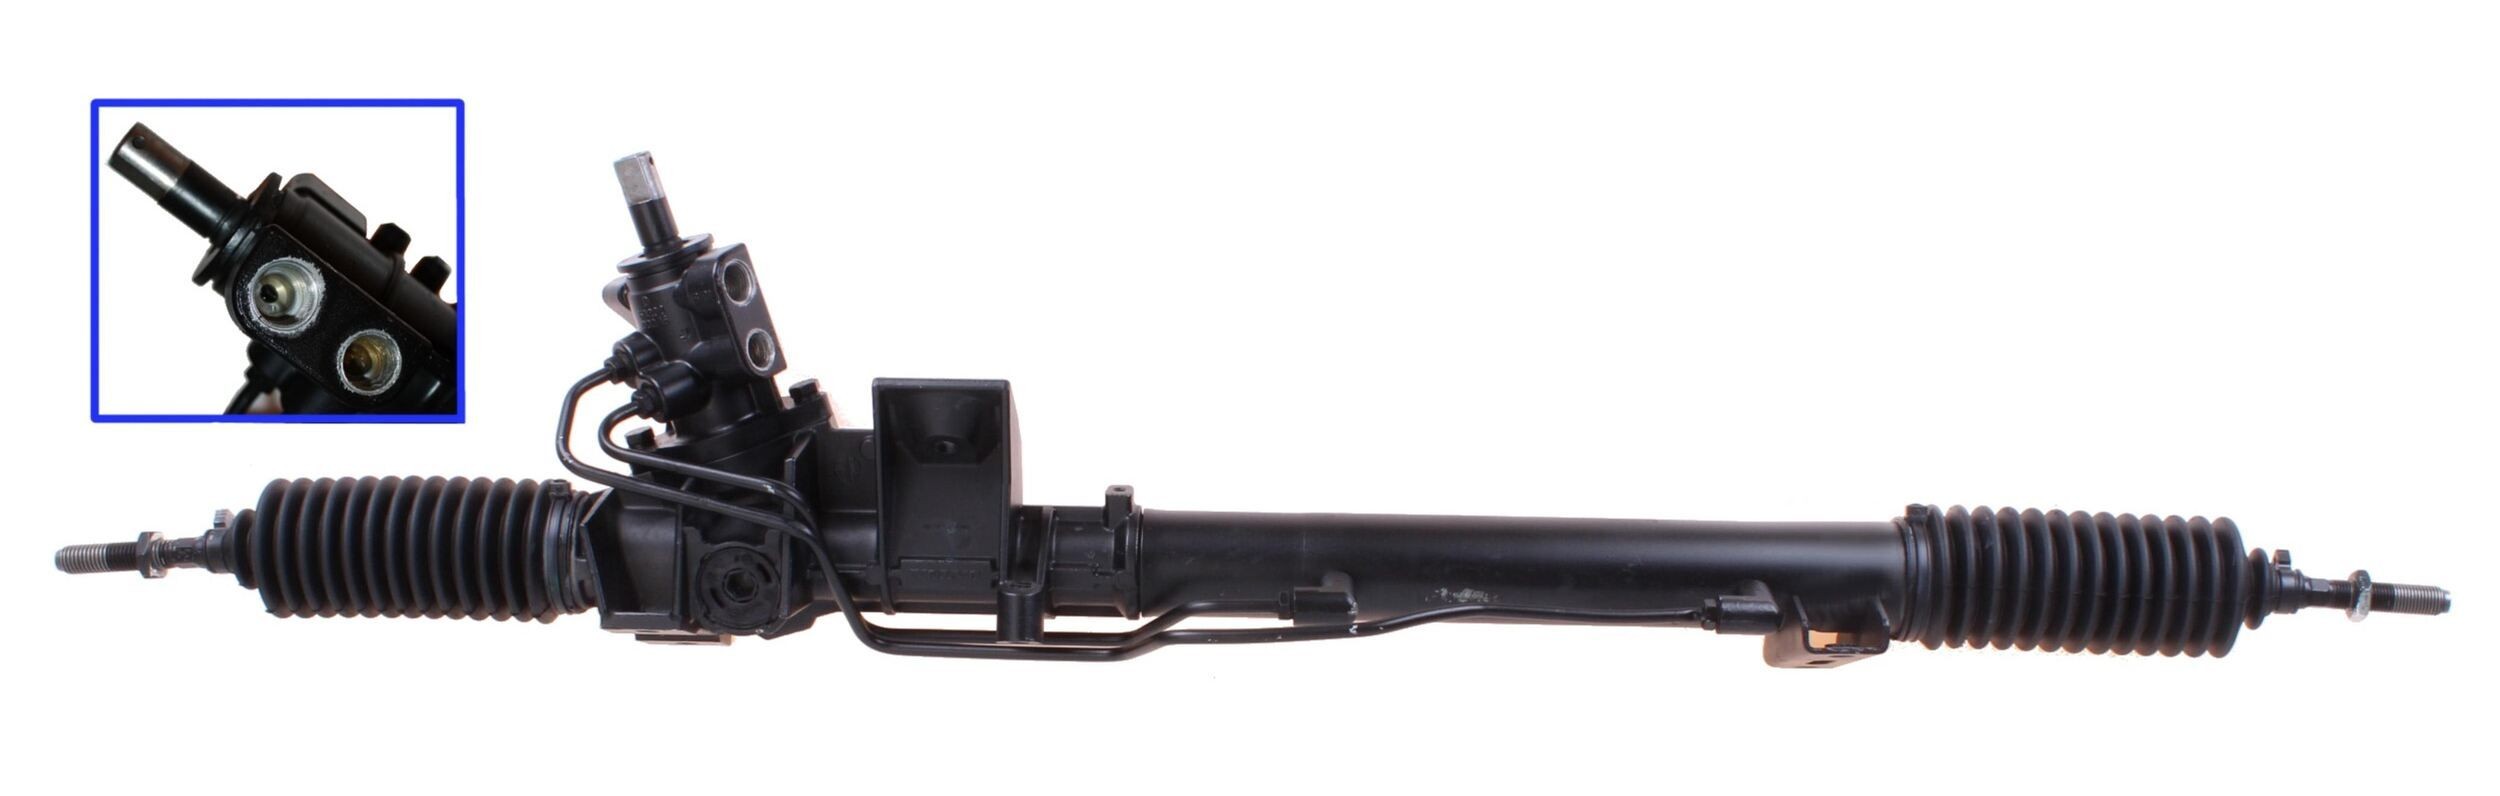 DRI 711520397 Steering rack Hydraulic, for vehicles without servotronic steering, for left-hand drive vehicles